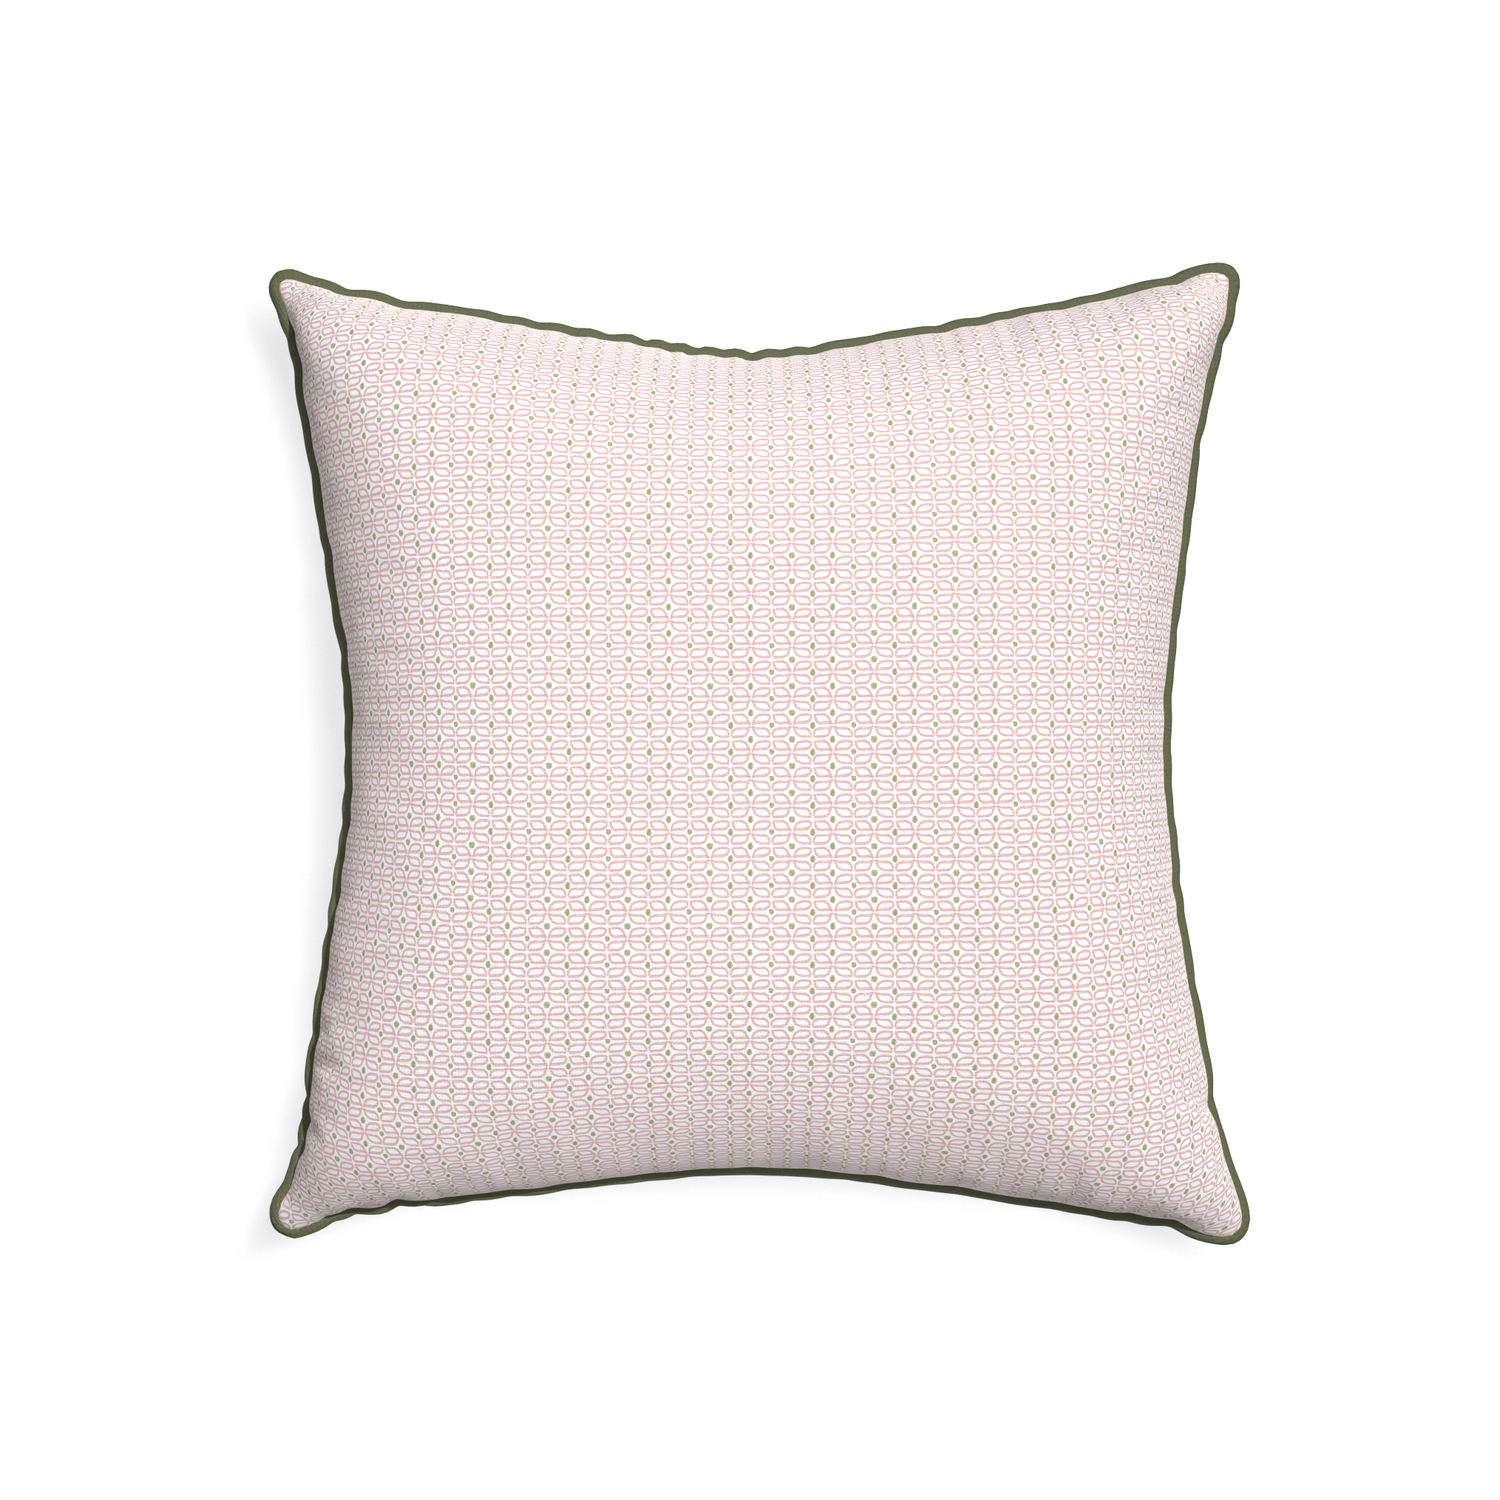 22-square loomi pink custom pillow with f piping on white background